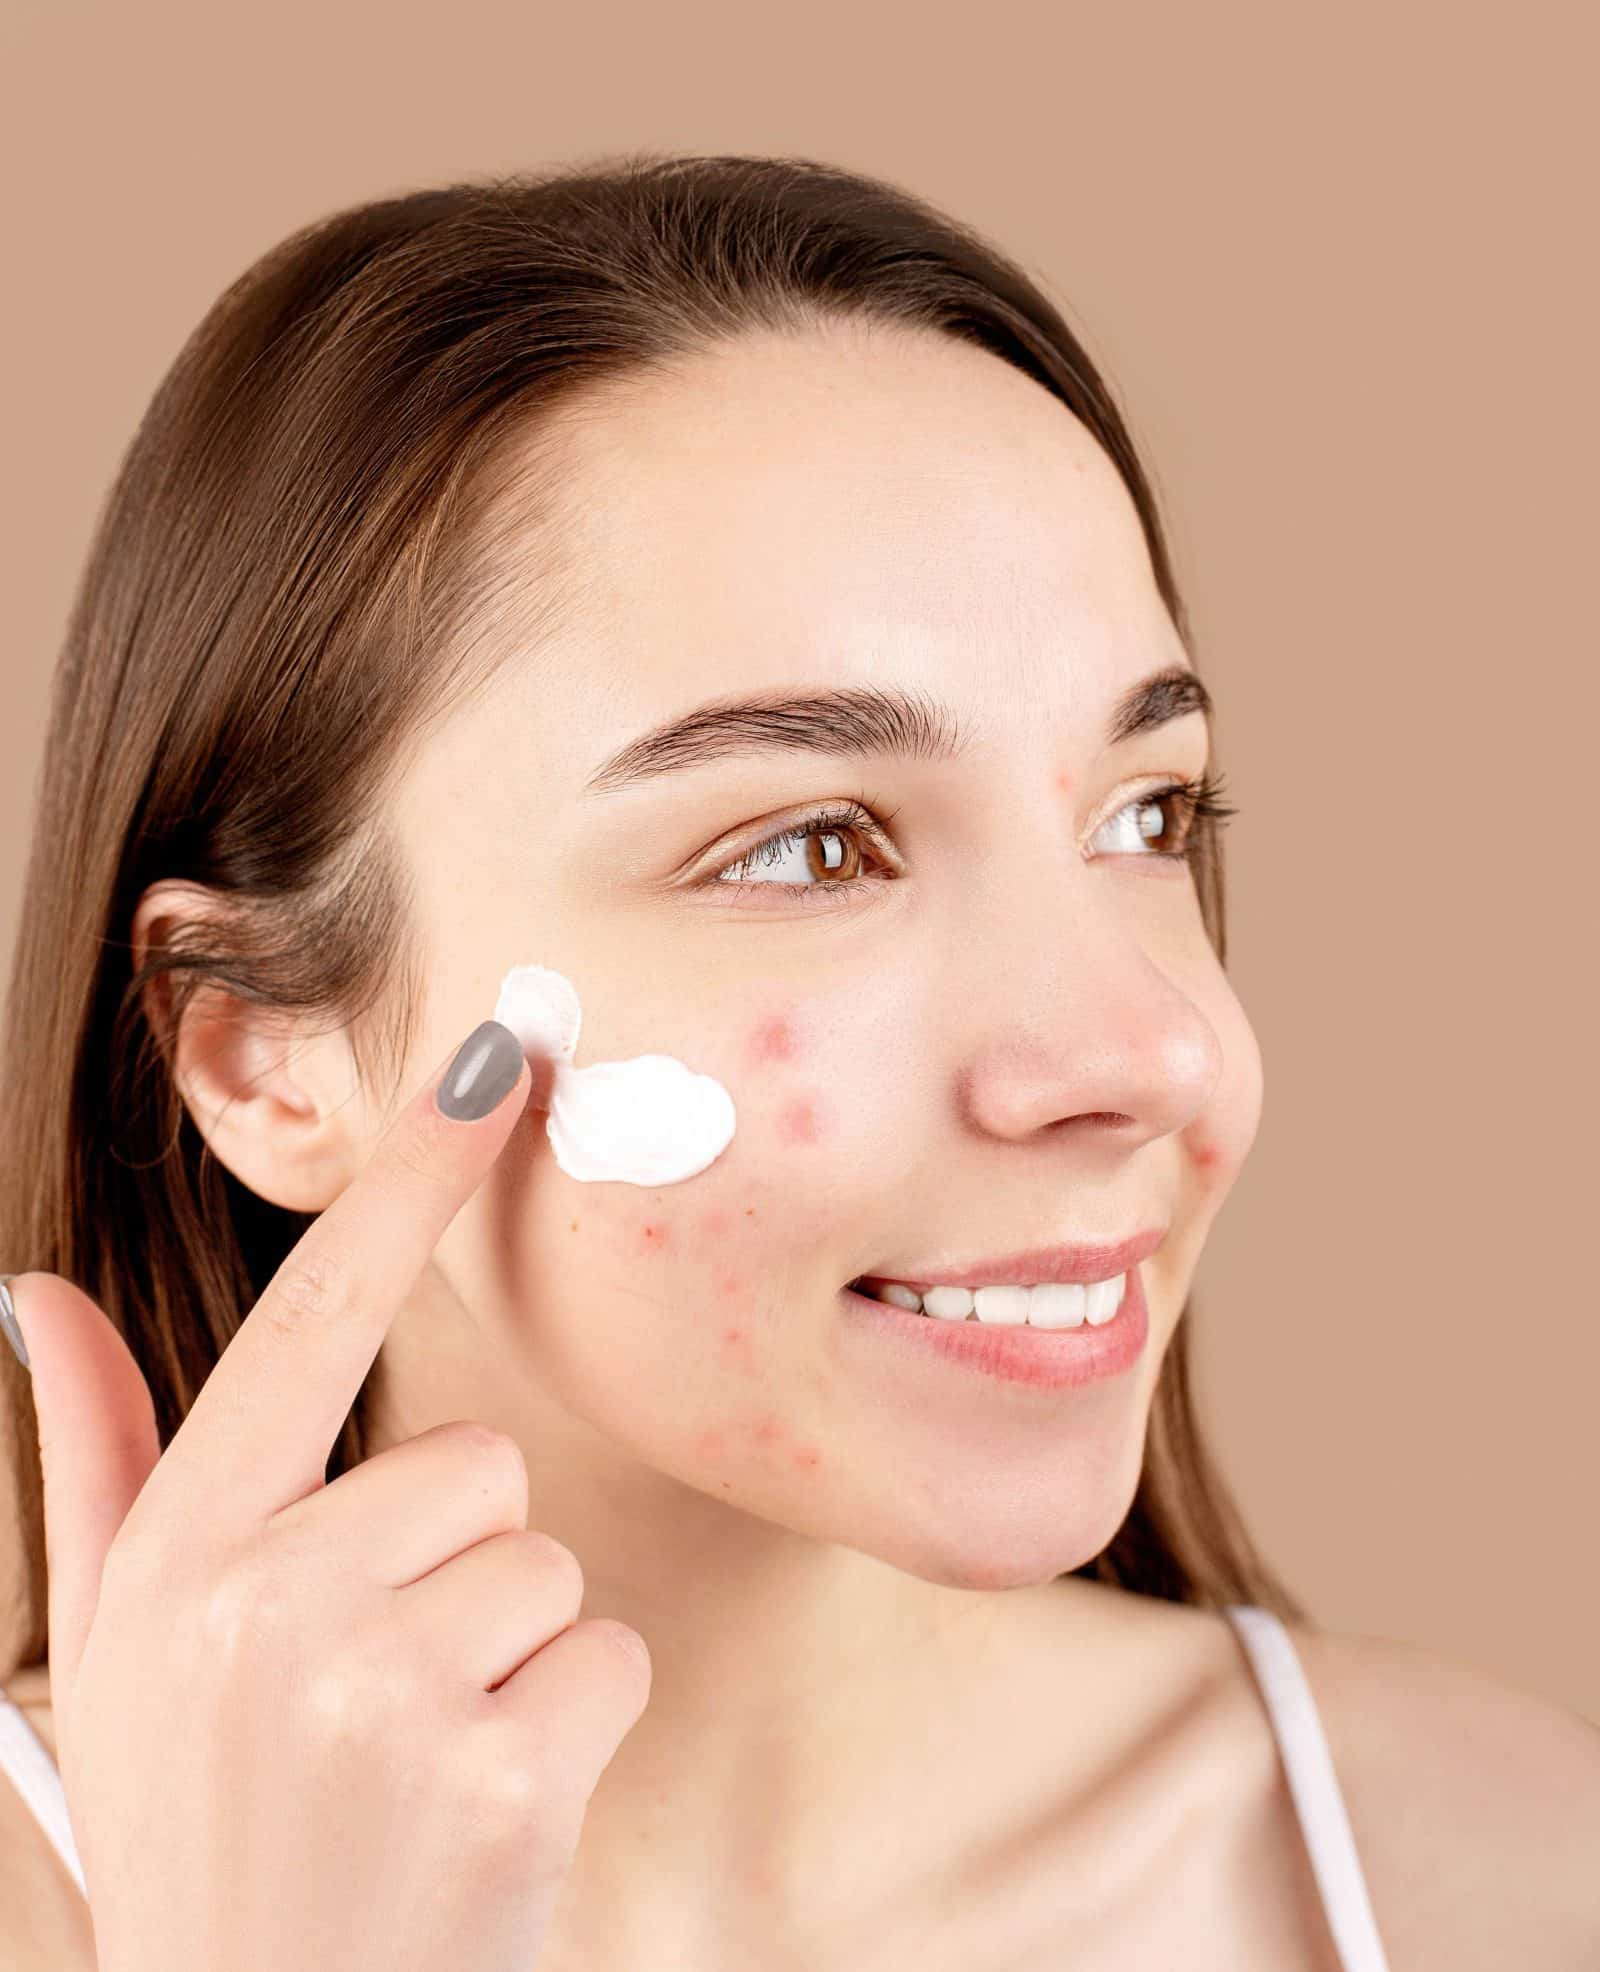 Best Acne Products For Sensitive Skin · Care to Beauty